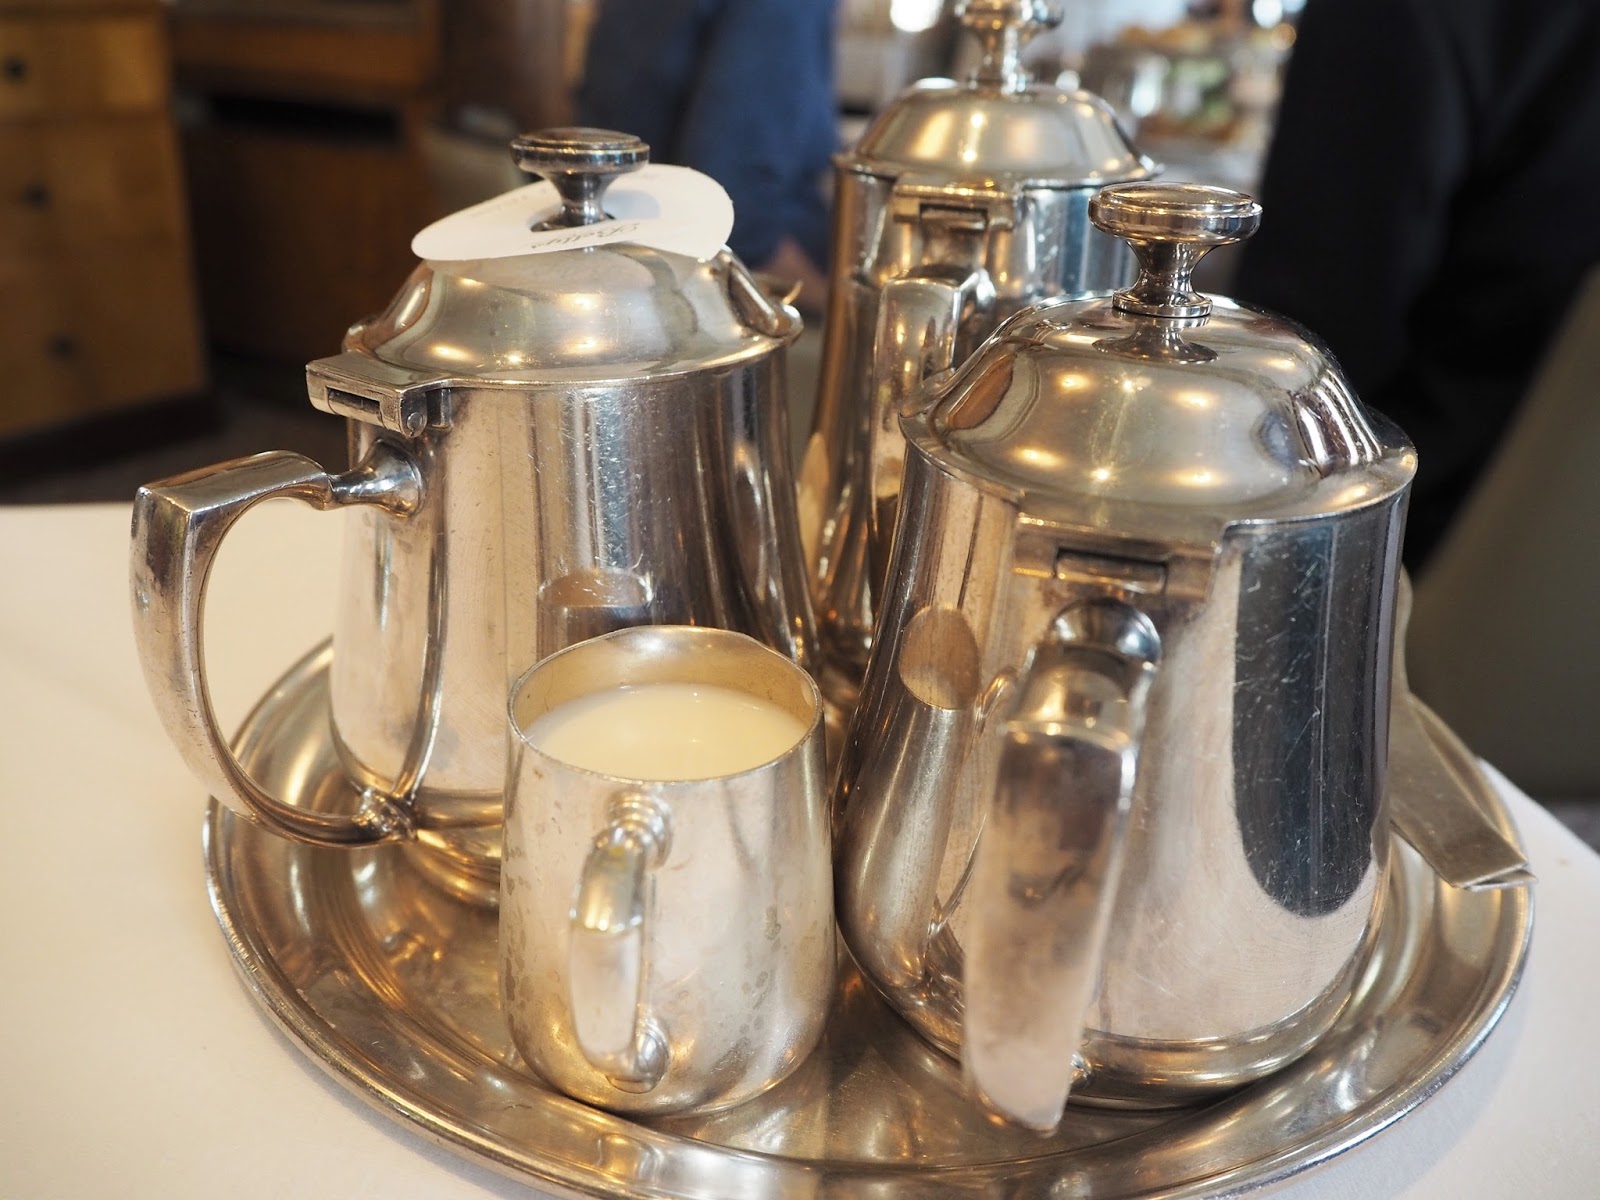 A review of afternoon tea at Betty's in York